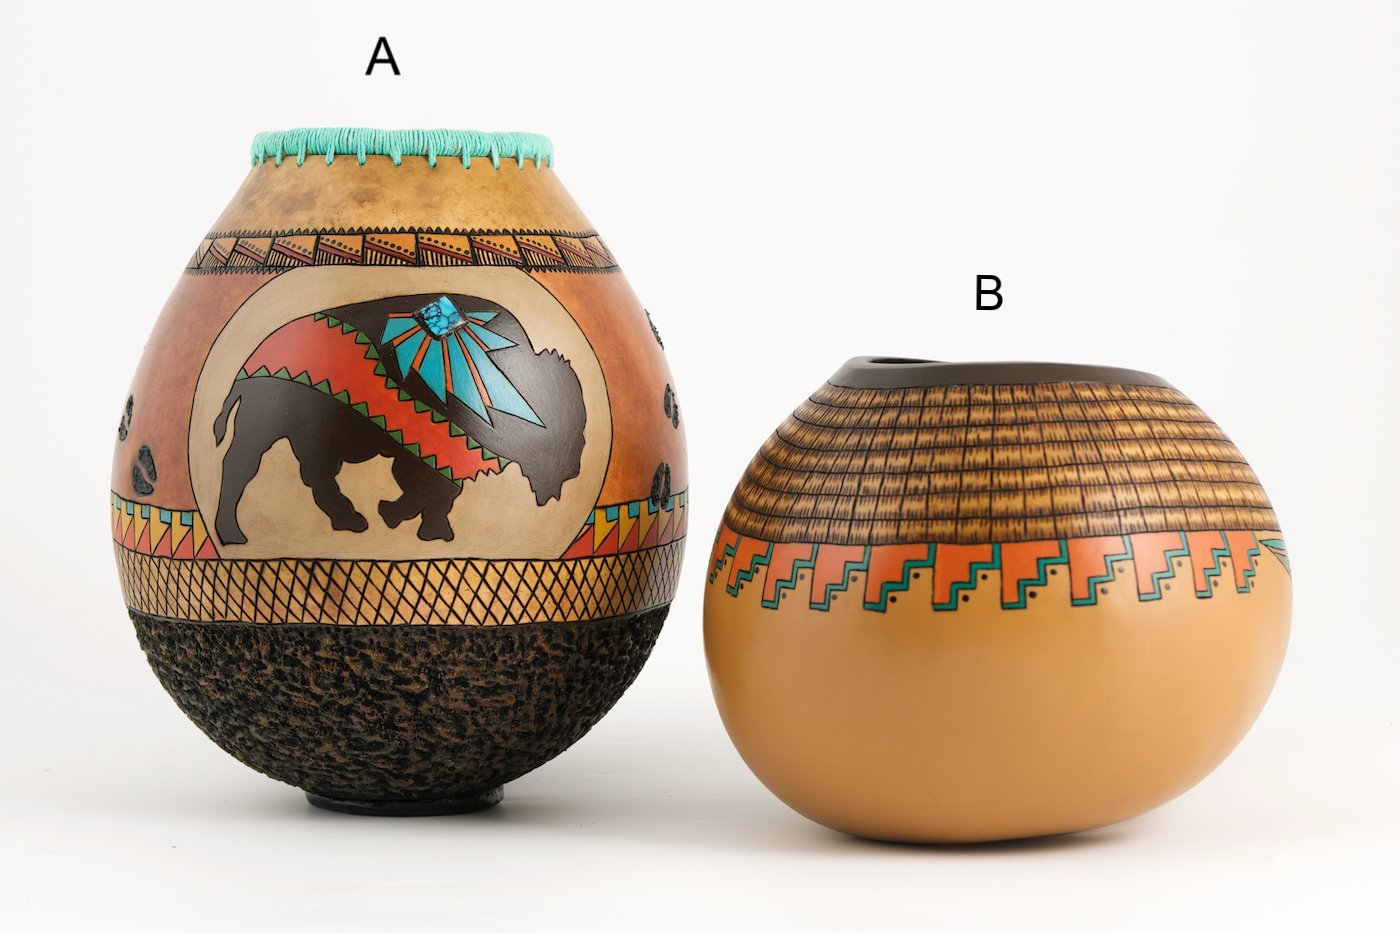 Hand painted, hand crafted gourd art by Andi Wardlaw